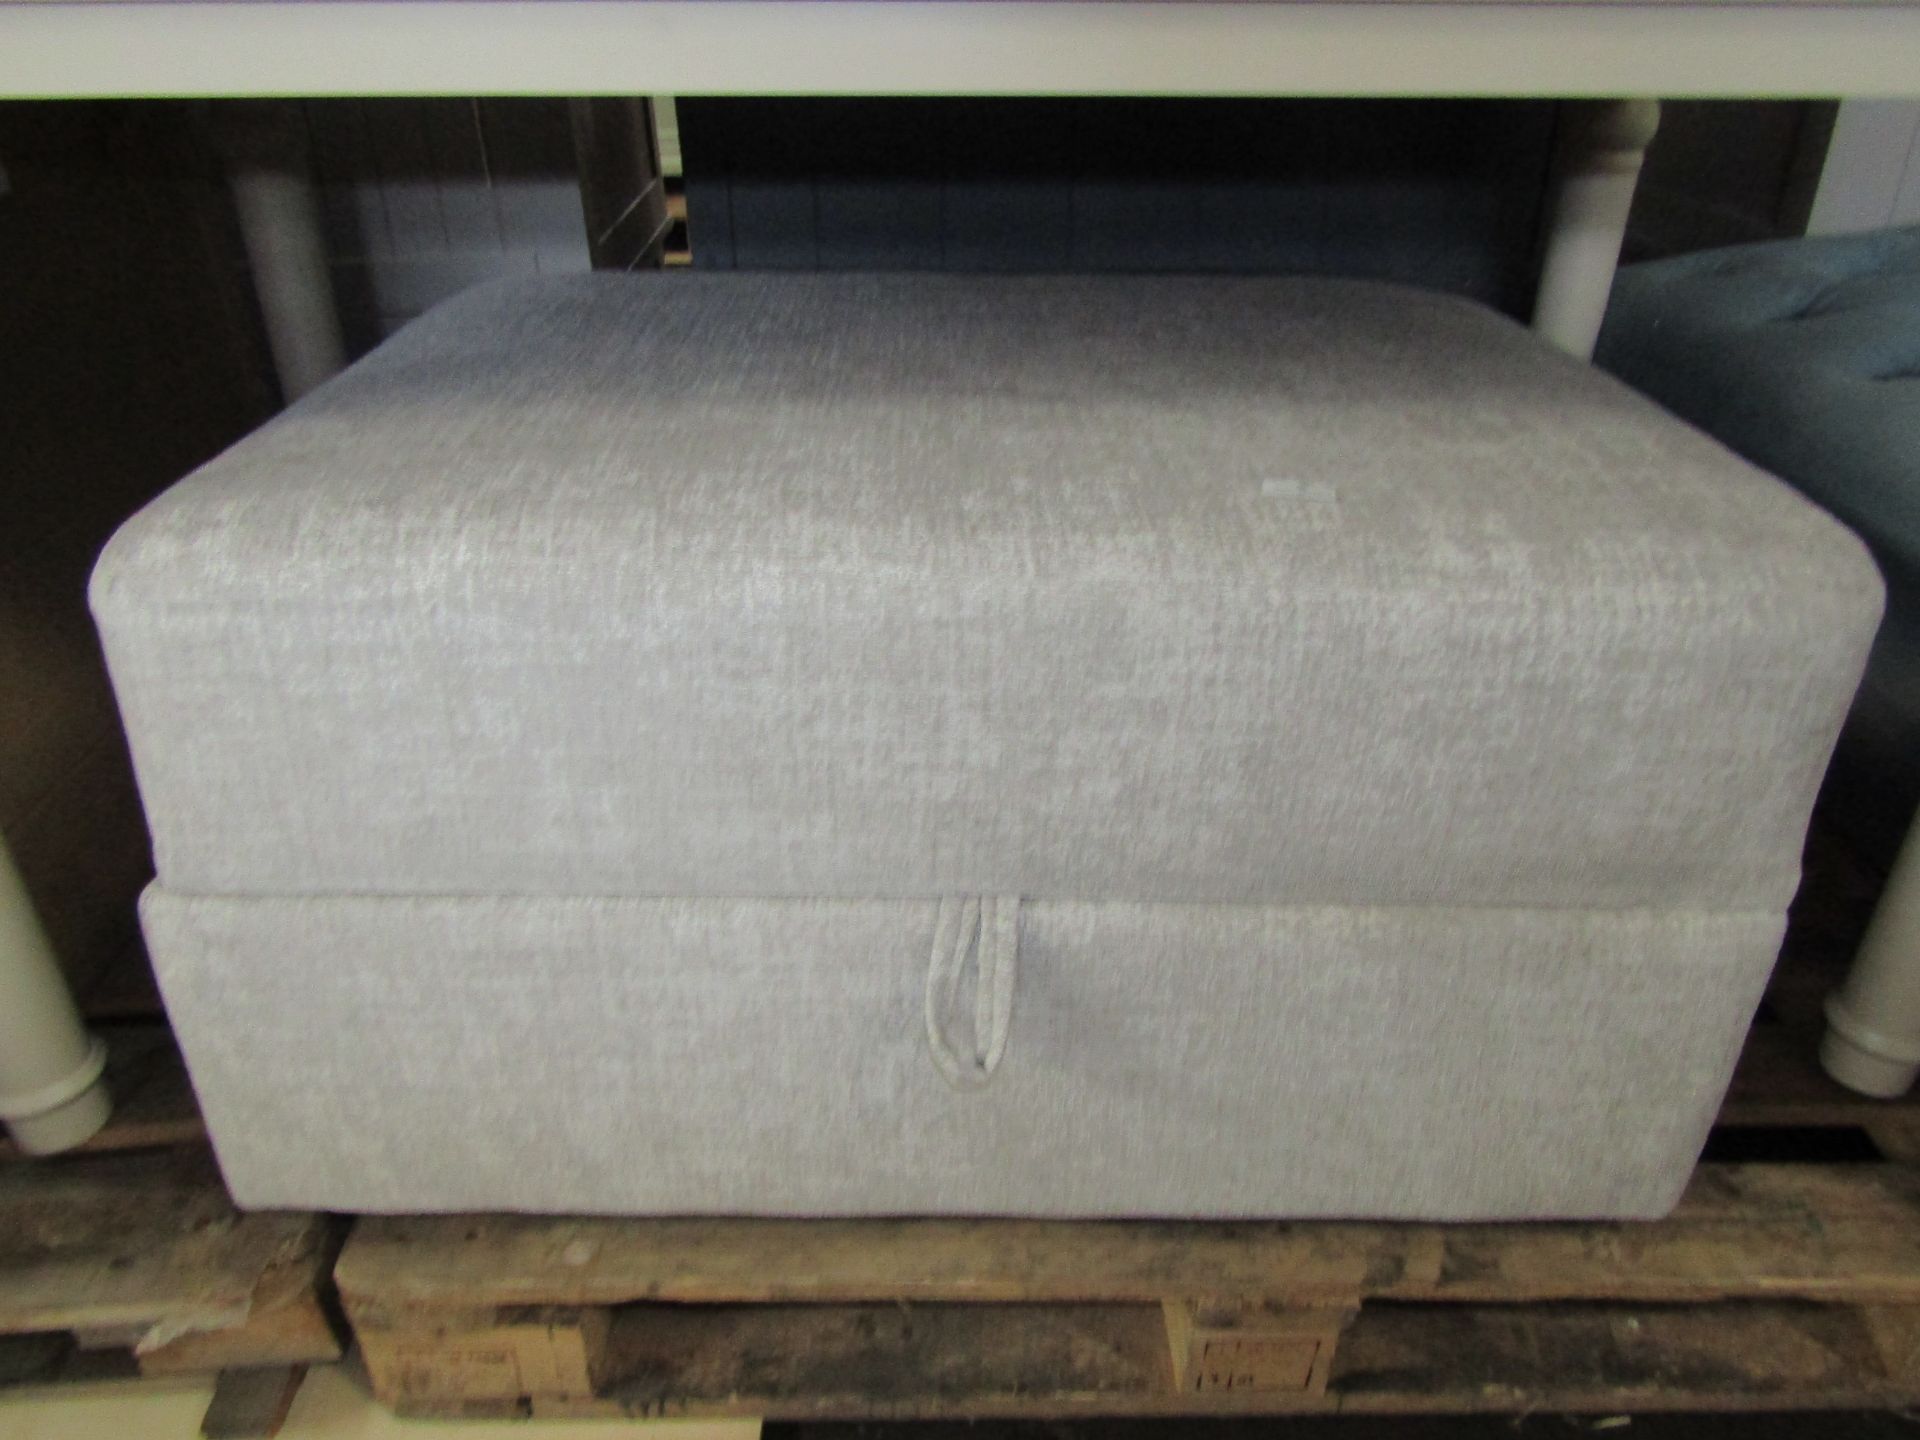 Oak Furnitureland Malvern Storage Footstool in Silver fabric RRP 449.99Upholstered in fabric with